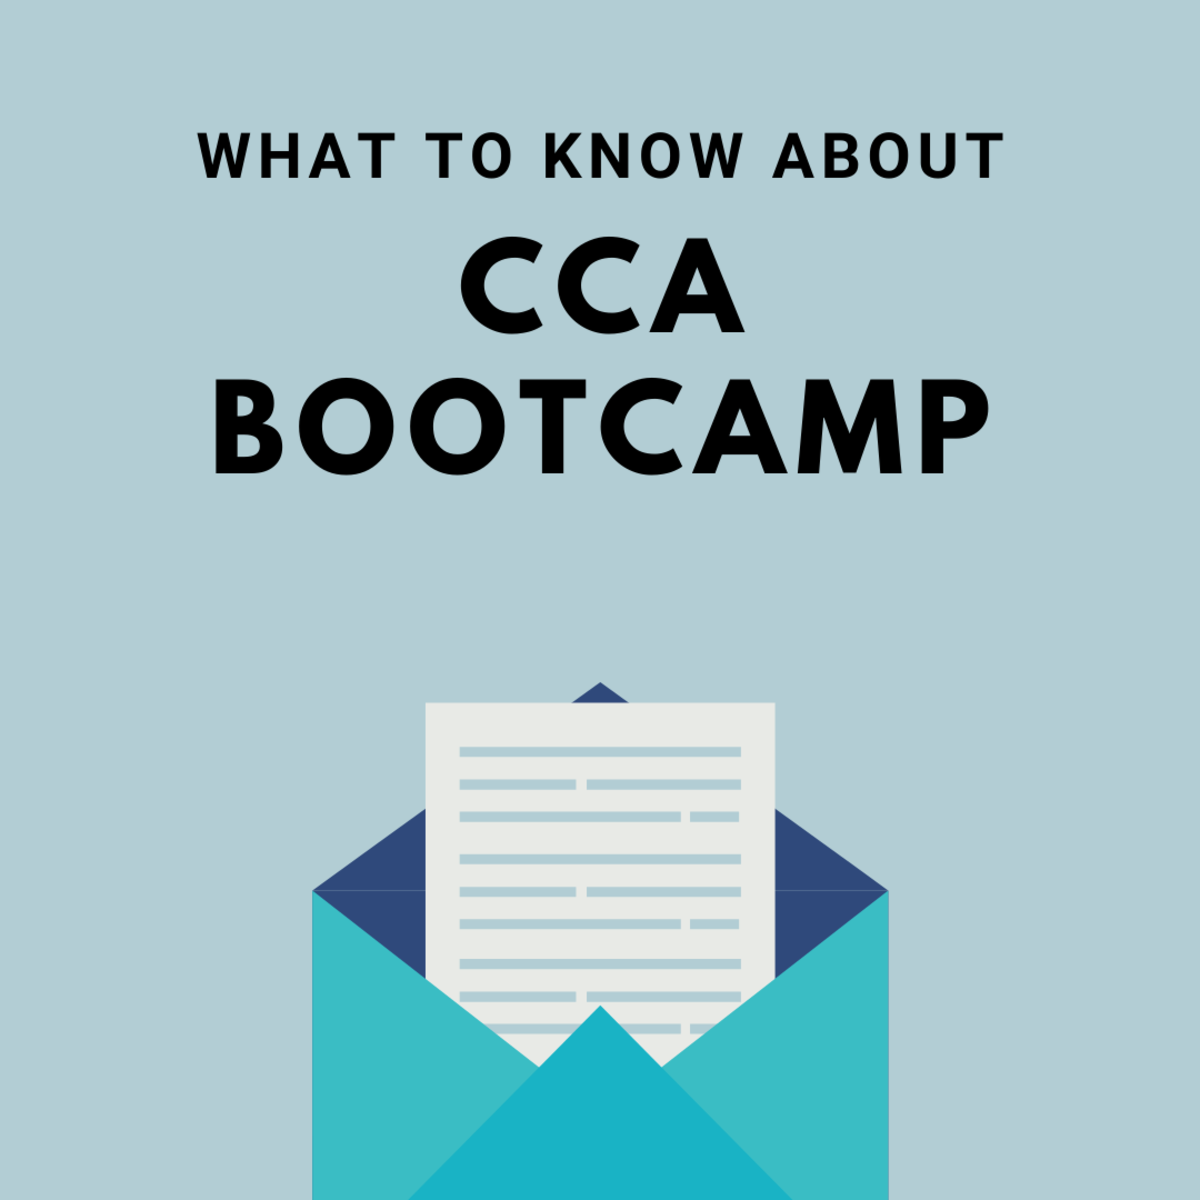 Learn all you need to know about the challenge of CCA Bootcamp.